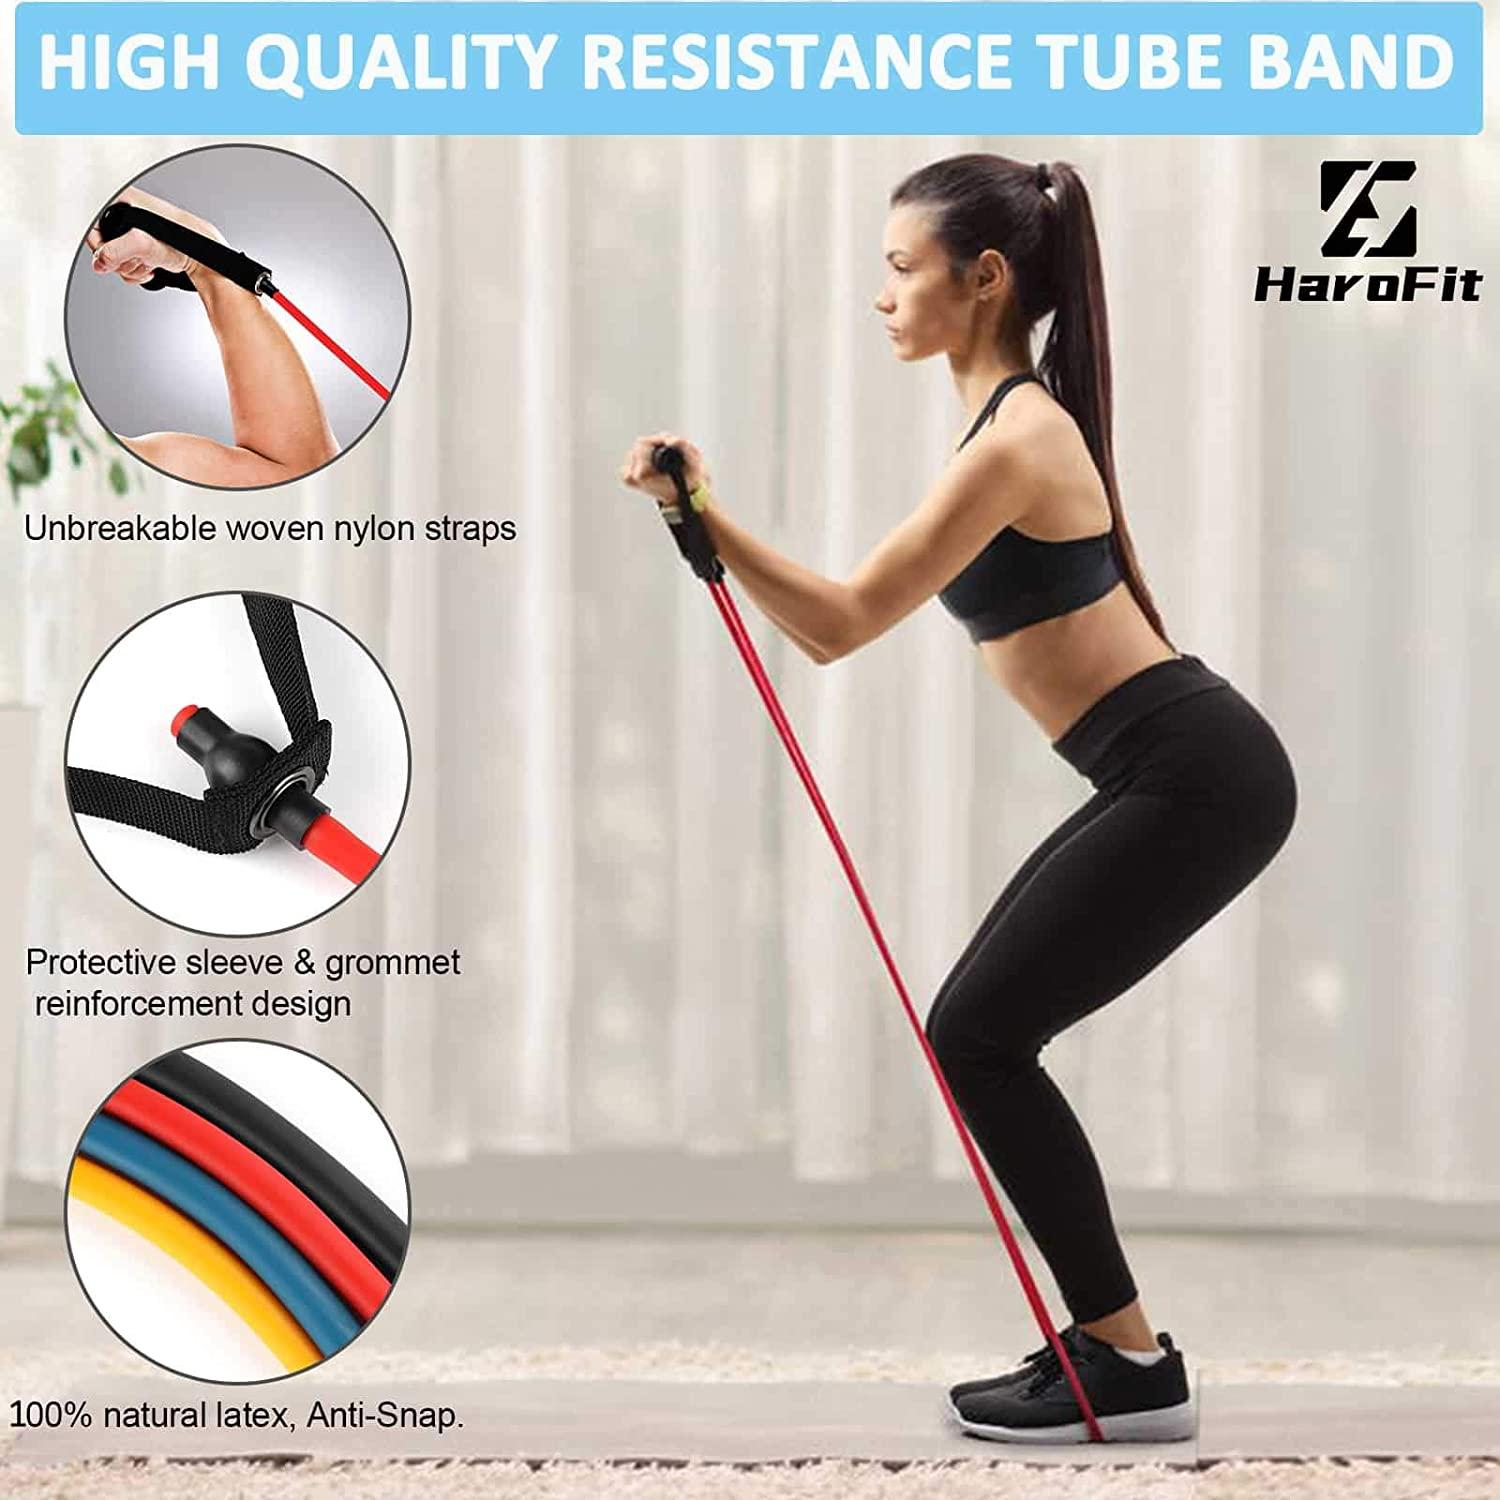 HaroFit Single Resistance Bands with Handles - Exercise Bands